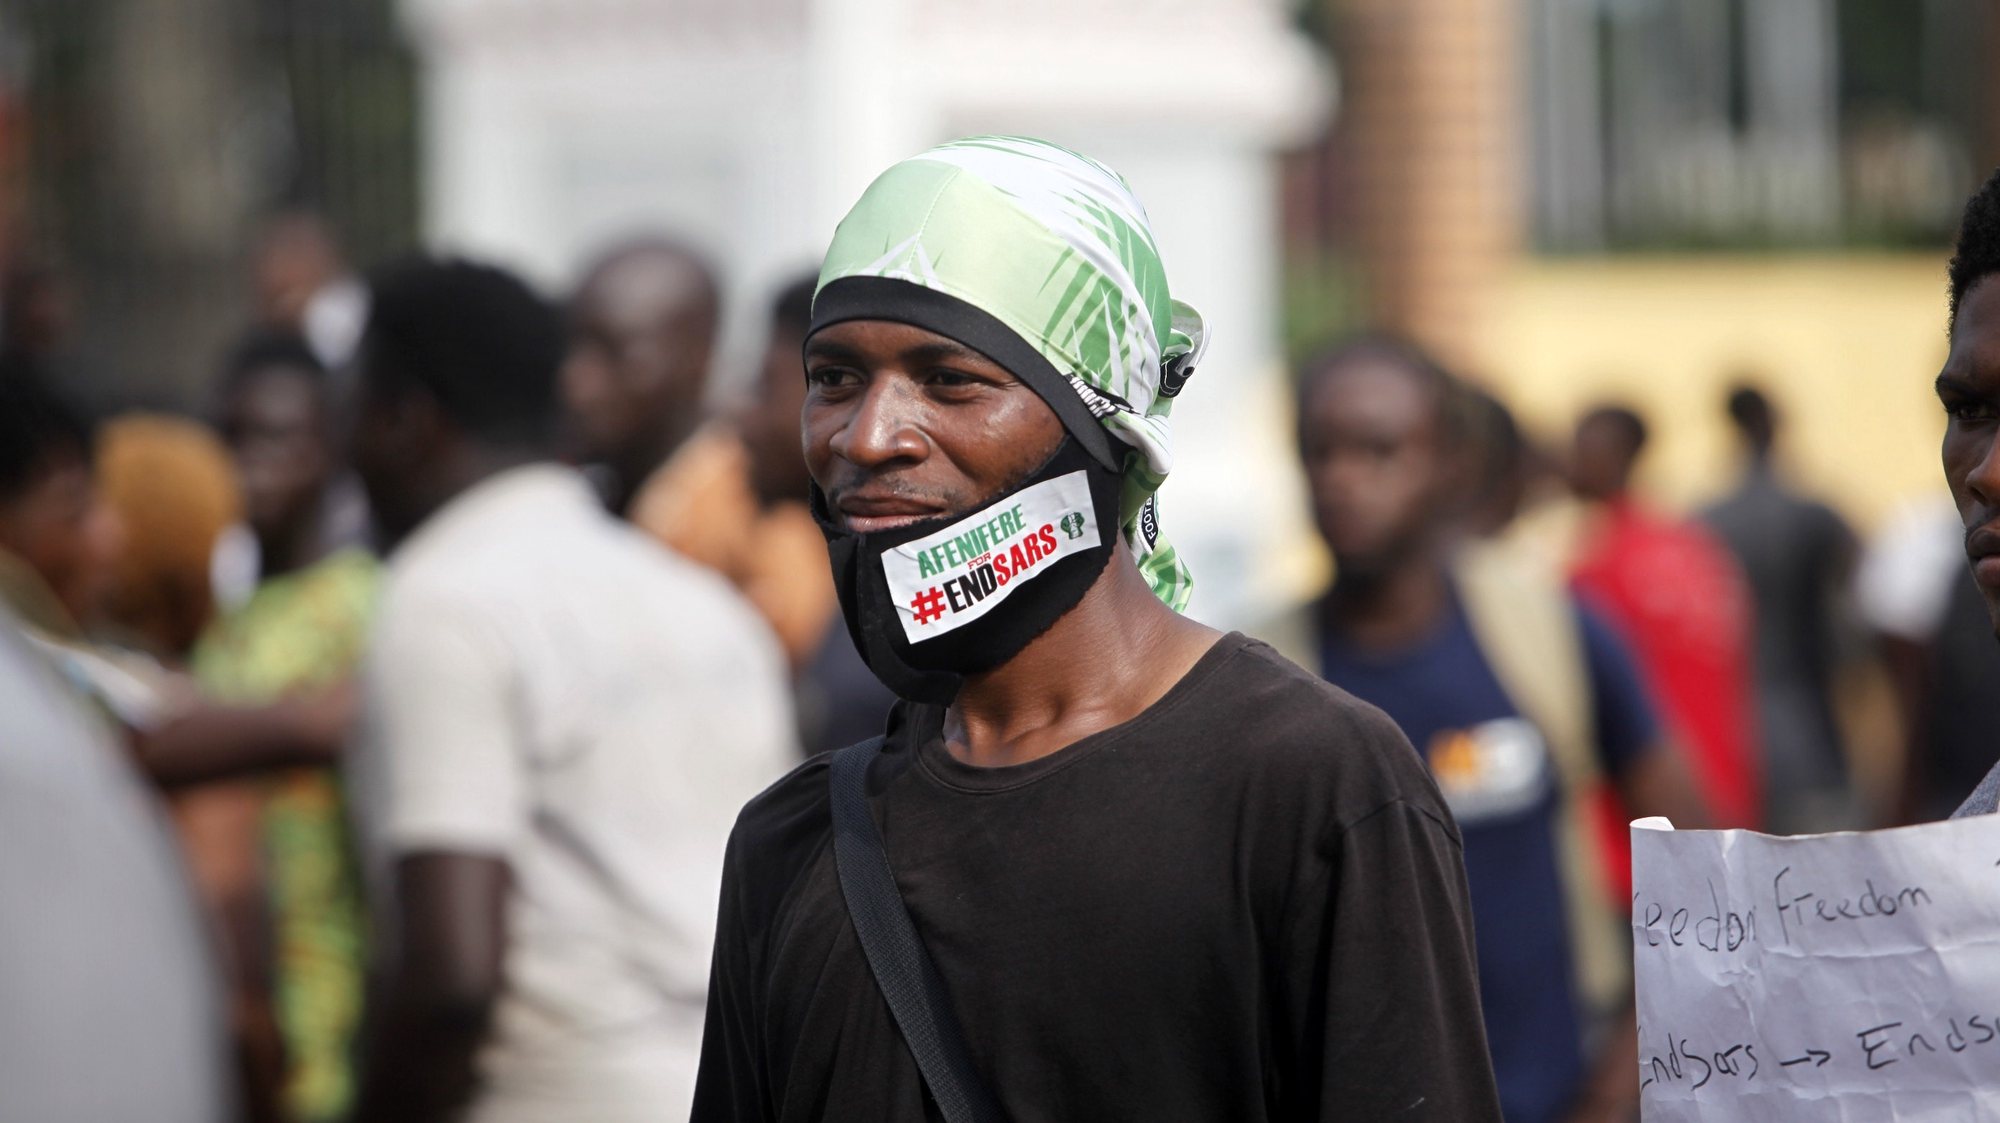 epa08760289 A protester wears a facemask with the inscription &#039;ENDSARS&#039; during a protest against the Nigeria rogue police, otherwise know as Special Anti-Robbery Squad (SARS), in Ikeja district of Lagos, Nigeria, 20 October 2020. It has been two weeks since the protests against SARS began and protesters say agitation against police brutality continues as an entry point to addressing other social and political issues such as corruption, official ineptitude to public accountability, and government inefficiency in Nigeria. The Lagos governor has imposed a 24-hour restriction on movement starting at four pm on 20 October in Lagos as protest begins to turn violent.  EPA/AKINTUNDE AKINLEYE